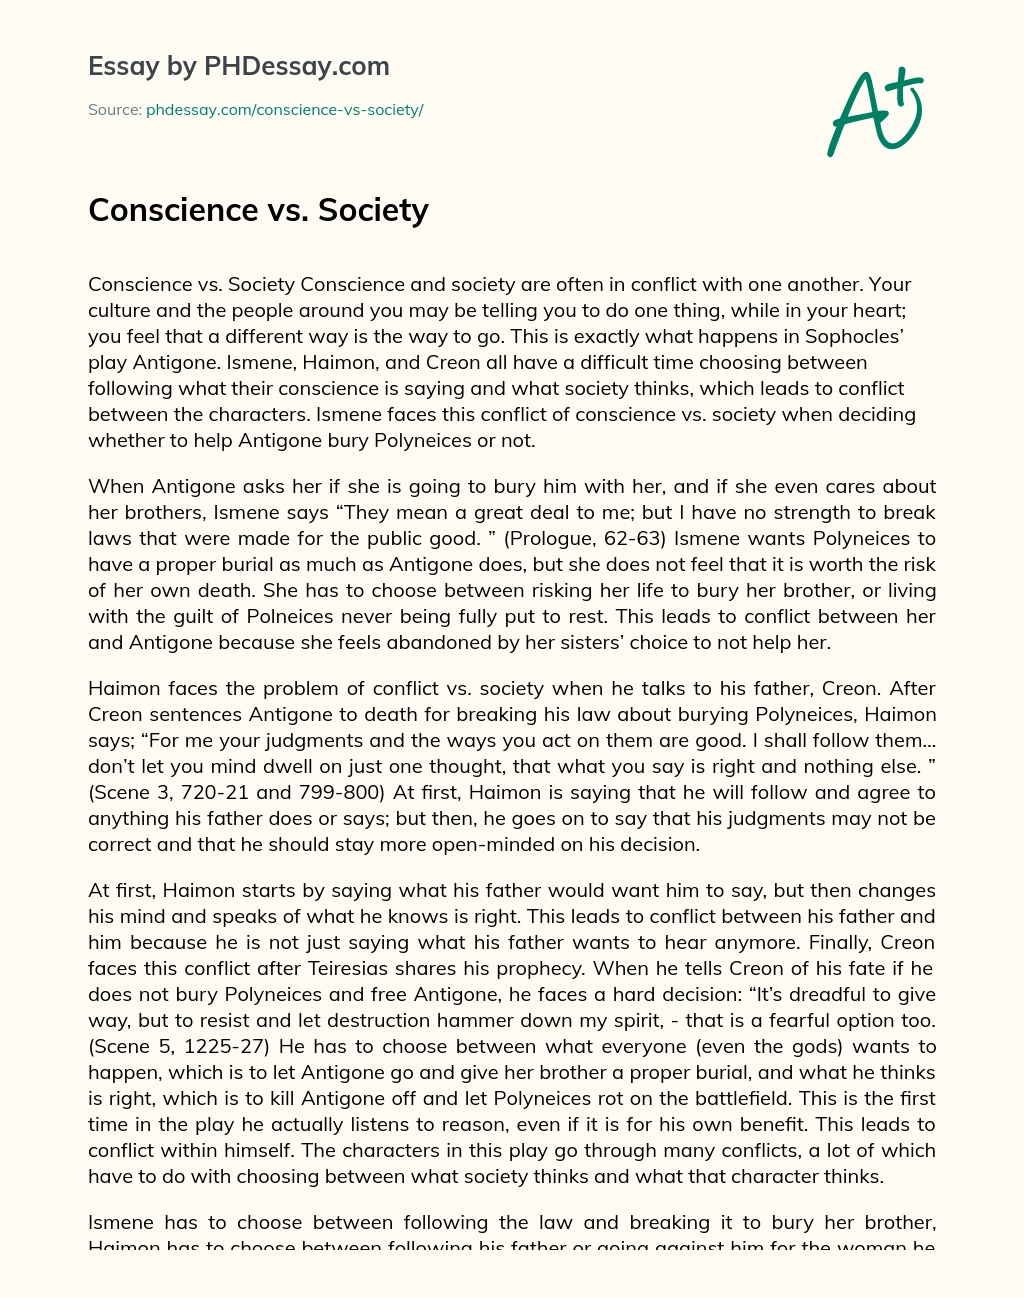 Conscience and Society Conflict essay